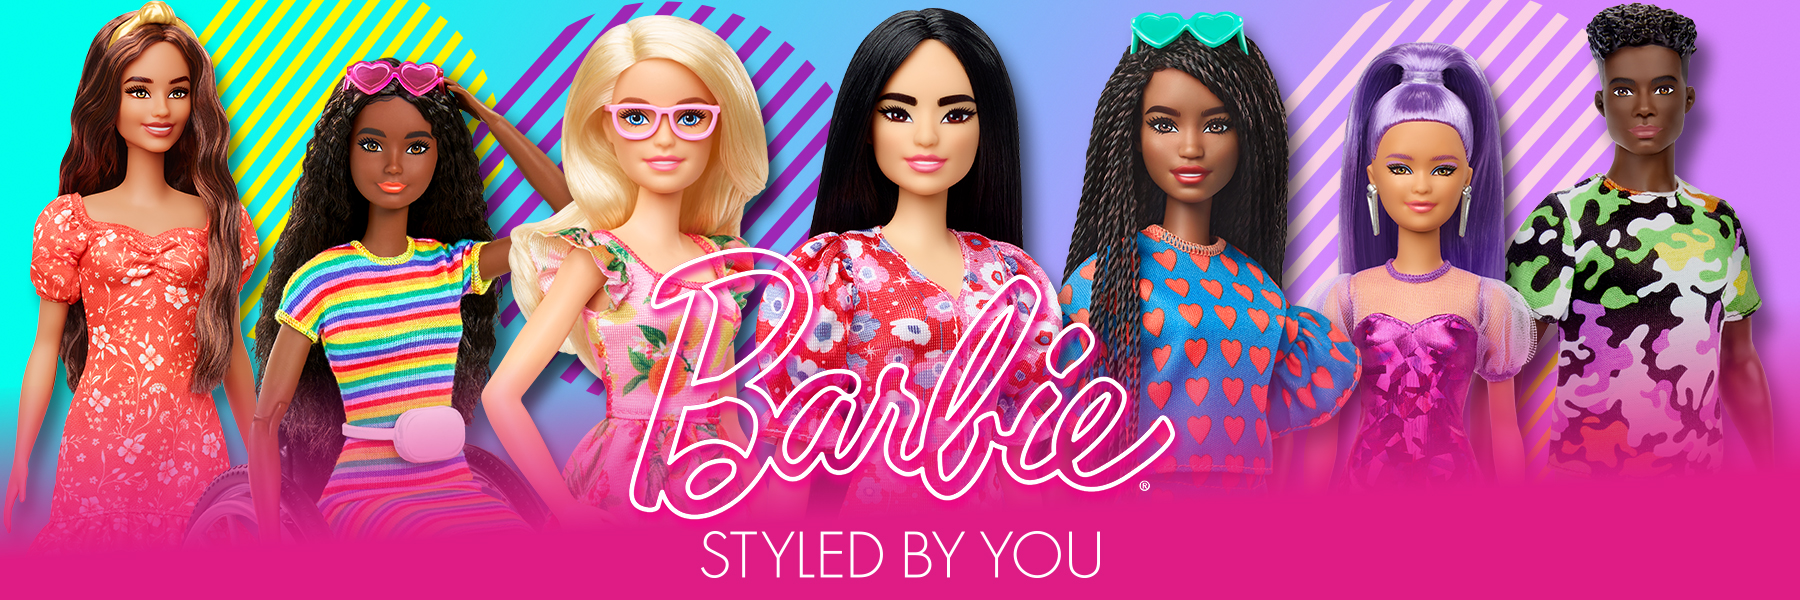 Barbie personalizzabili Styled By You